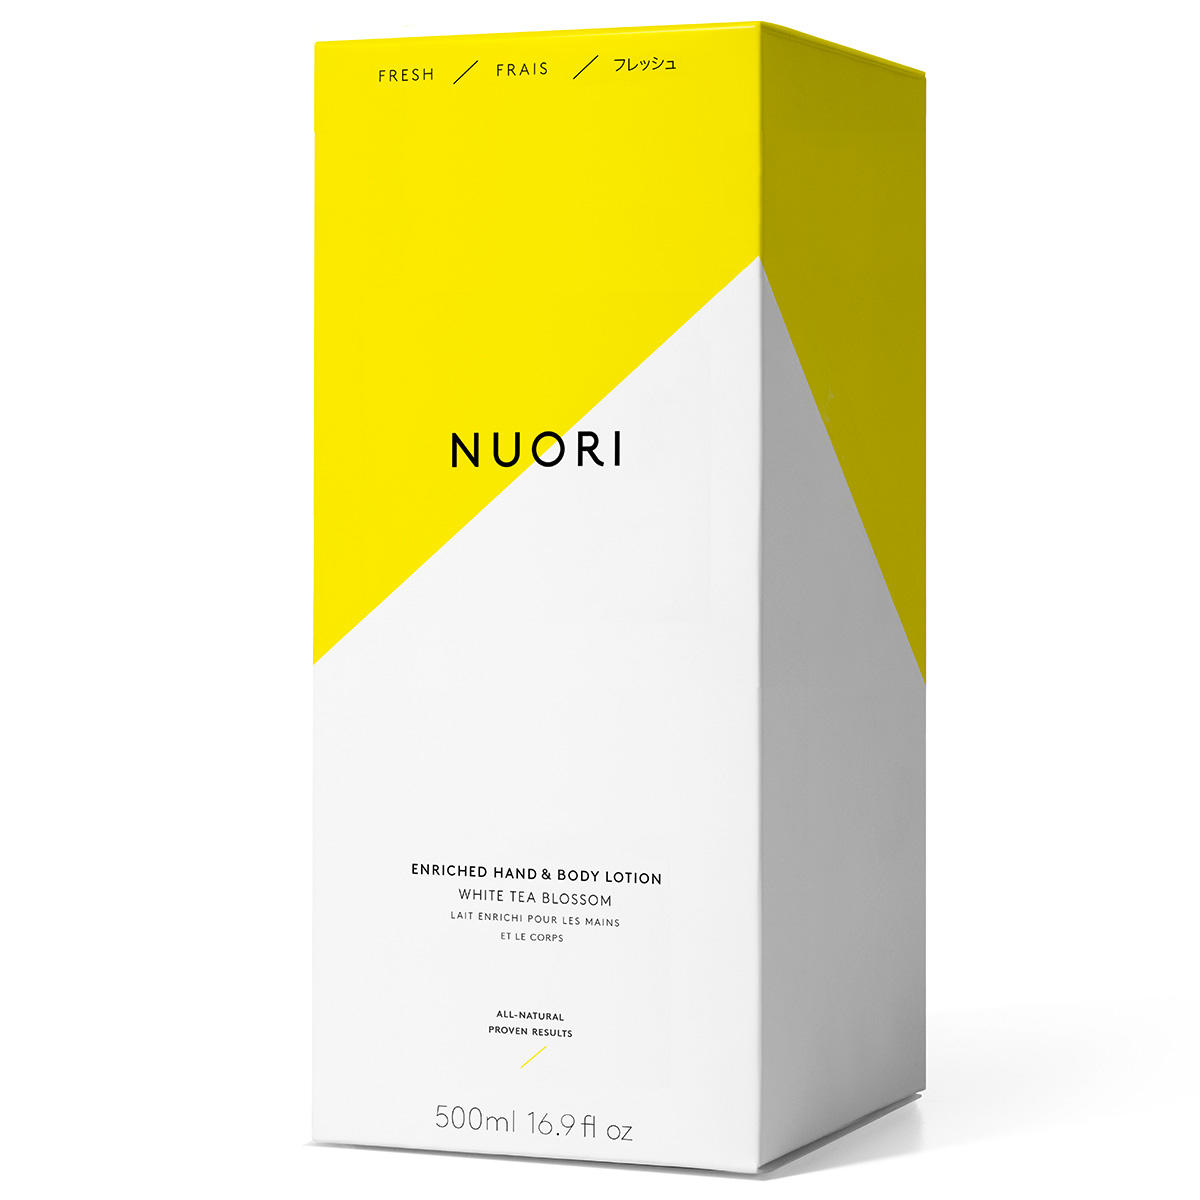 NUORI Enriched Hand & Body Lotion 500 ml - 2